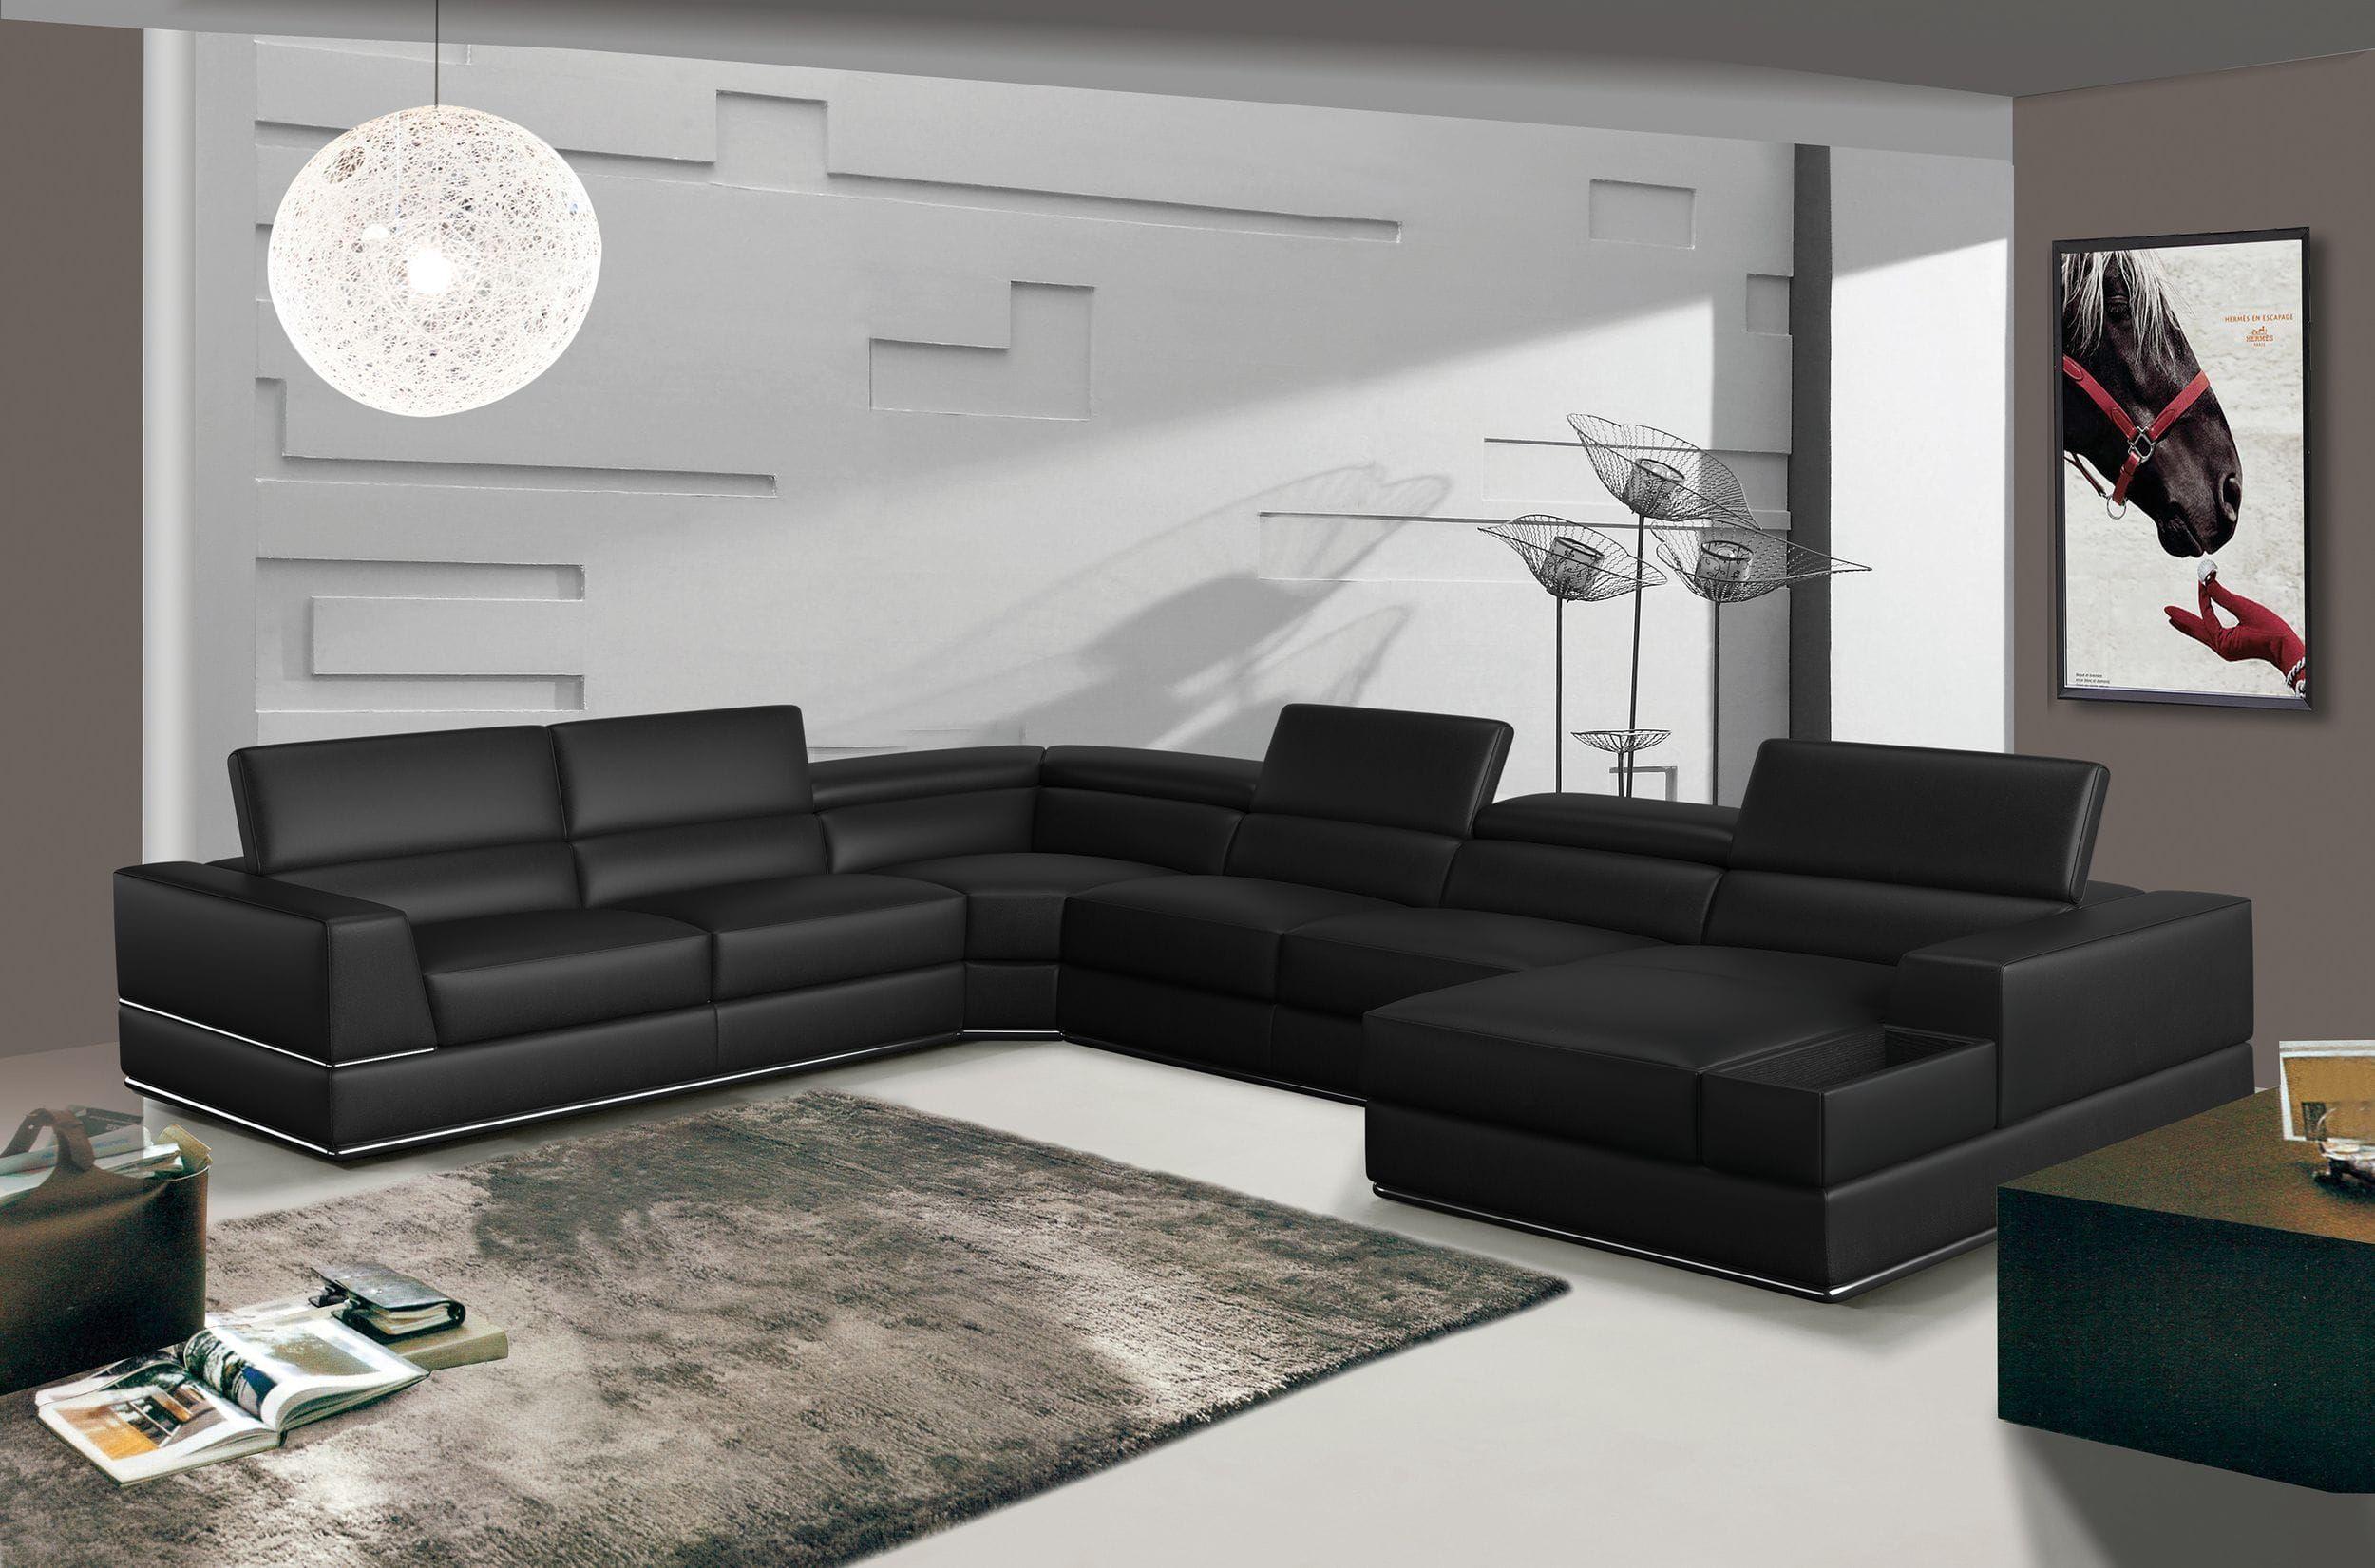 Contemporary, Modern Sectional Sofa VGCA5106-BL-BLK-SECT 78547 VGCA5106-BL-BLK-SECT 78547 in Black Bonded Leather